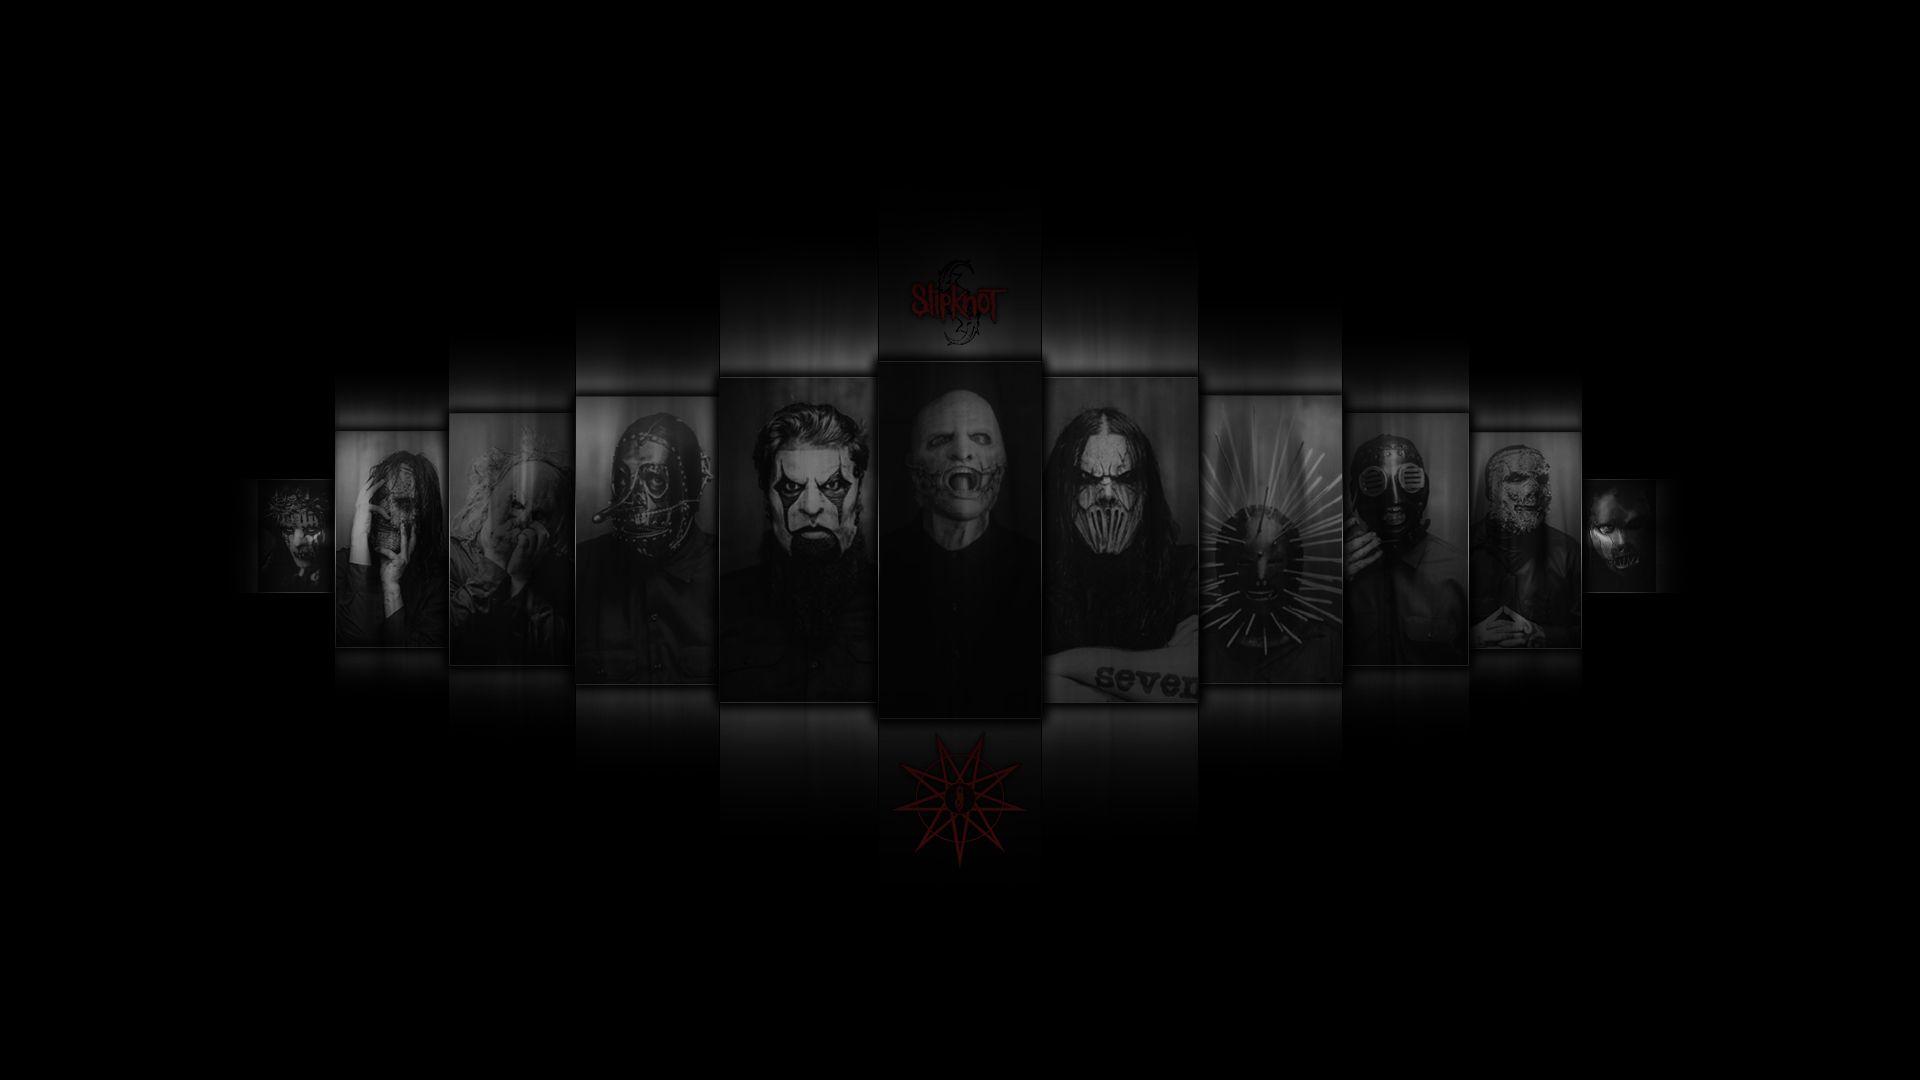 Any Slipknot fans in here? I made a WP in honor of their new album